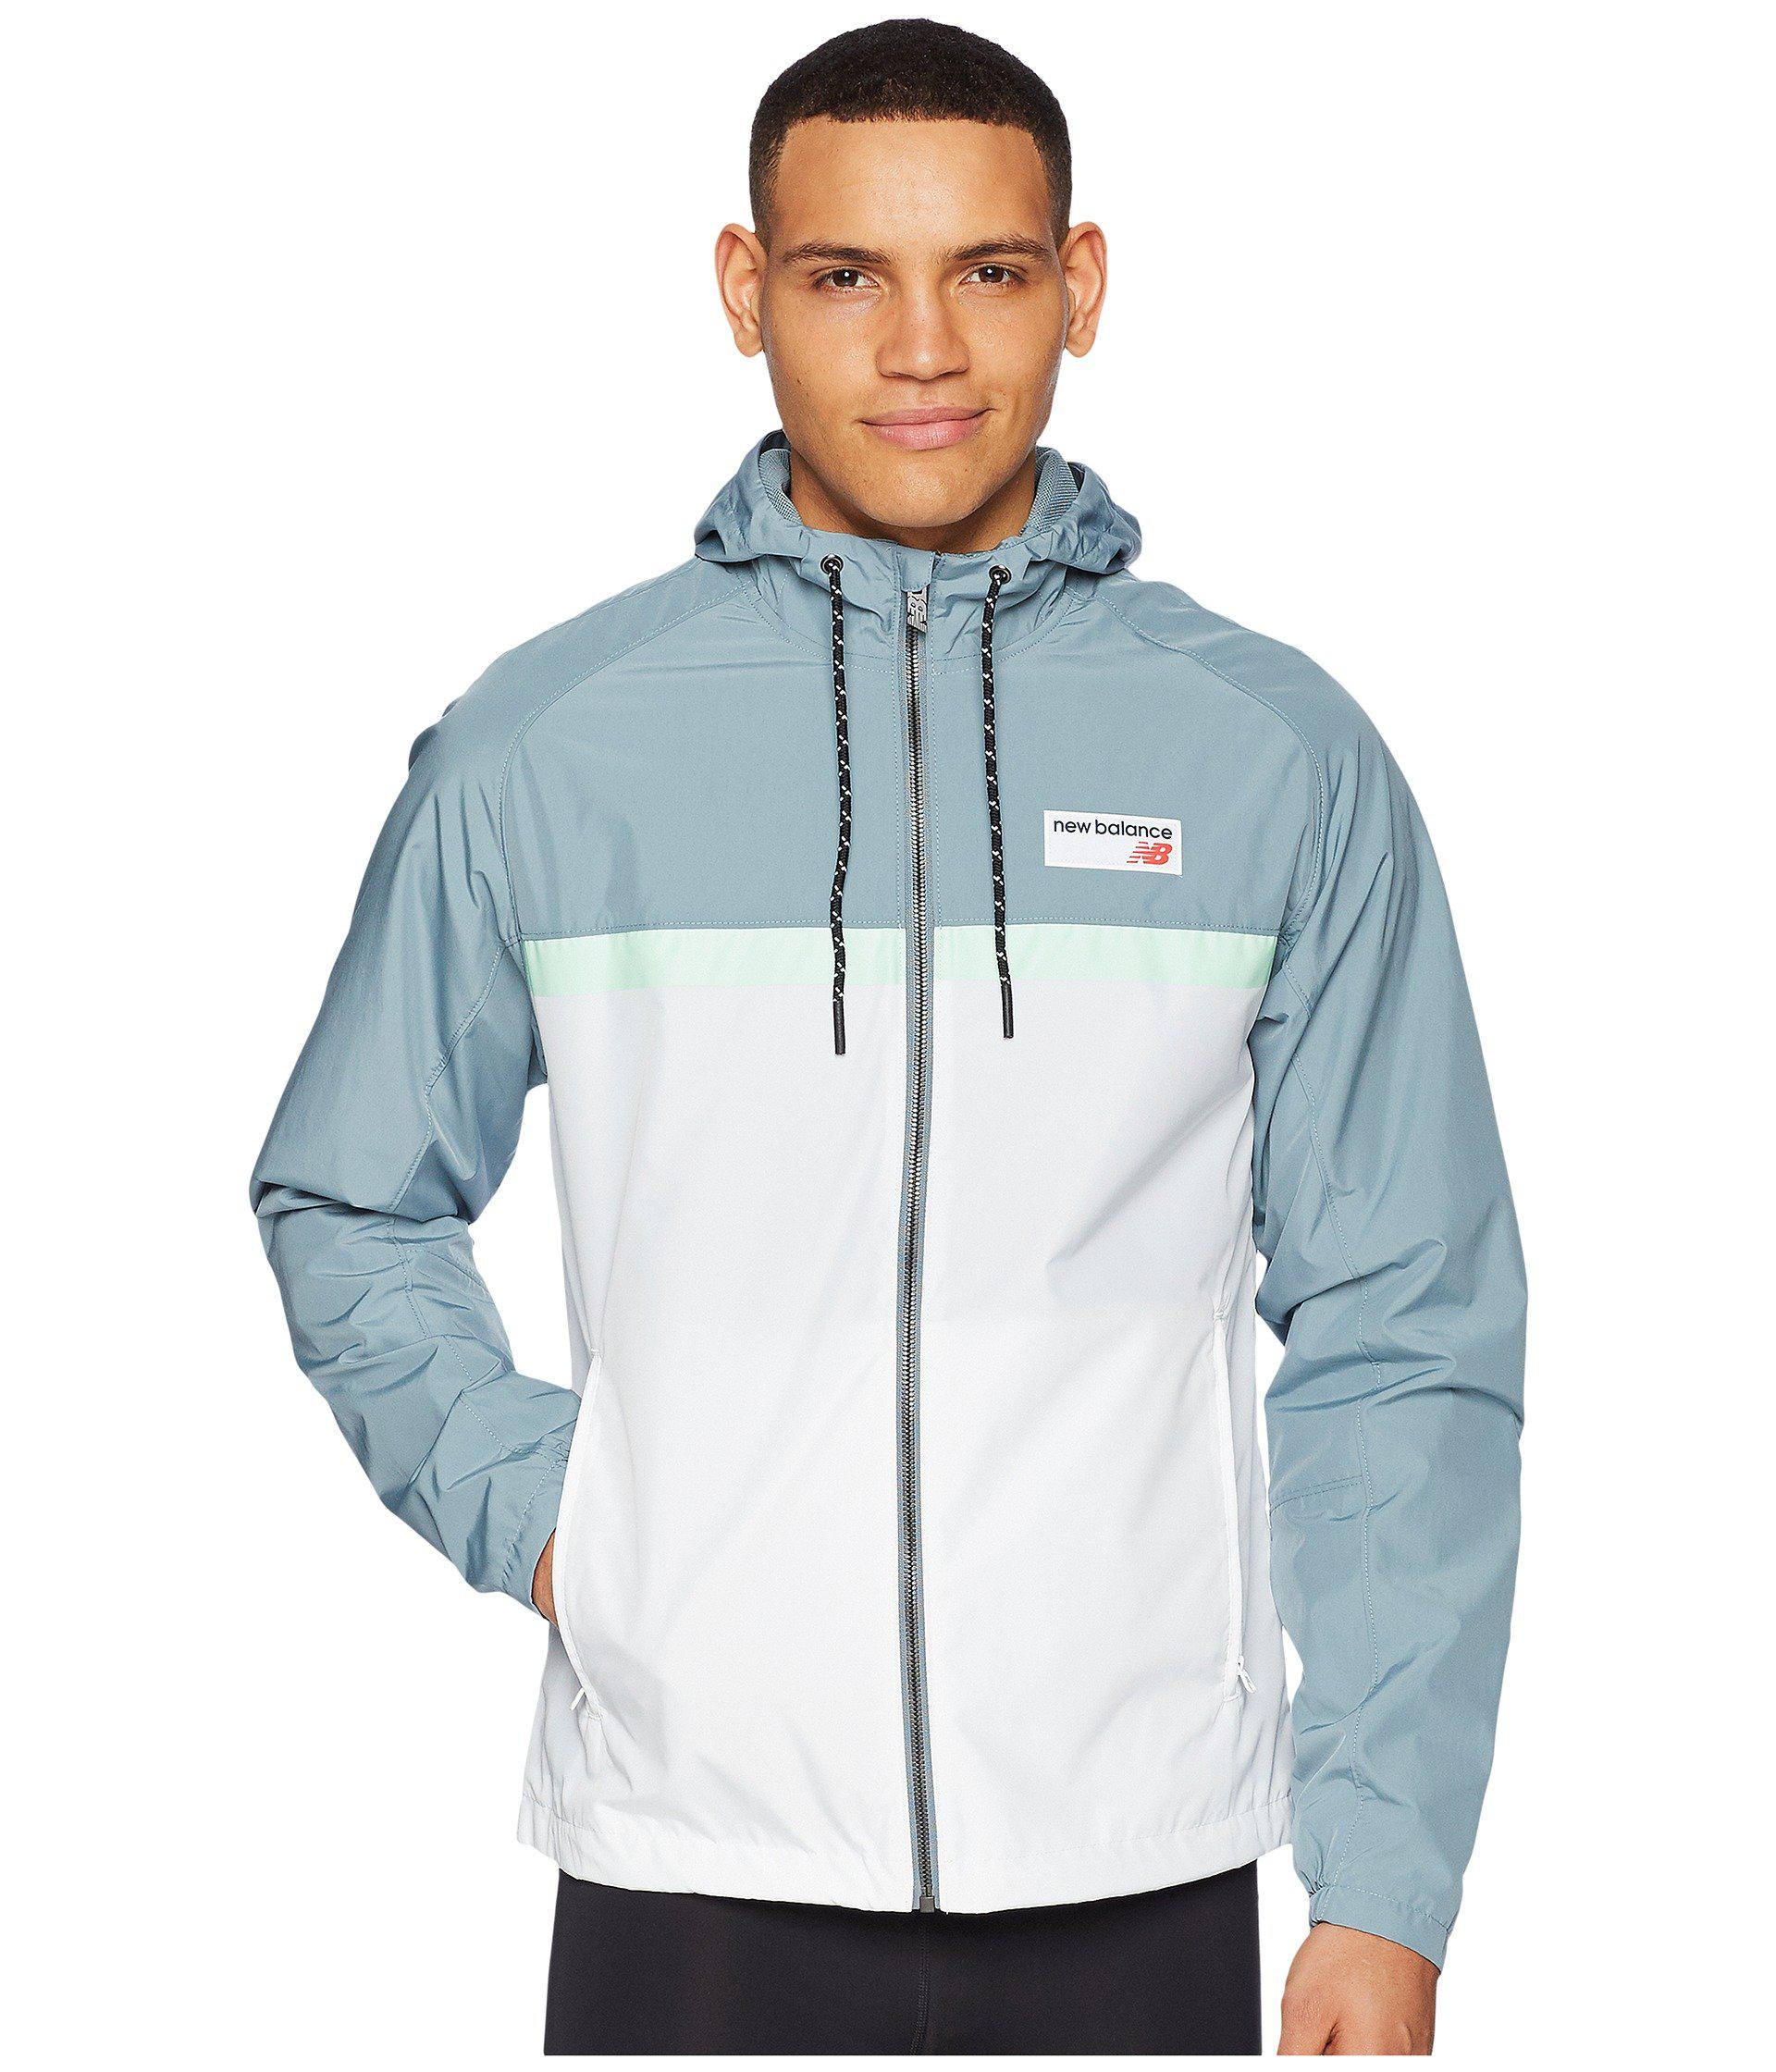 New Balance Synthetic Nb Athletics 78 Jacket in Slate (Blue) for Men - Lyst